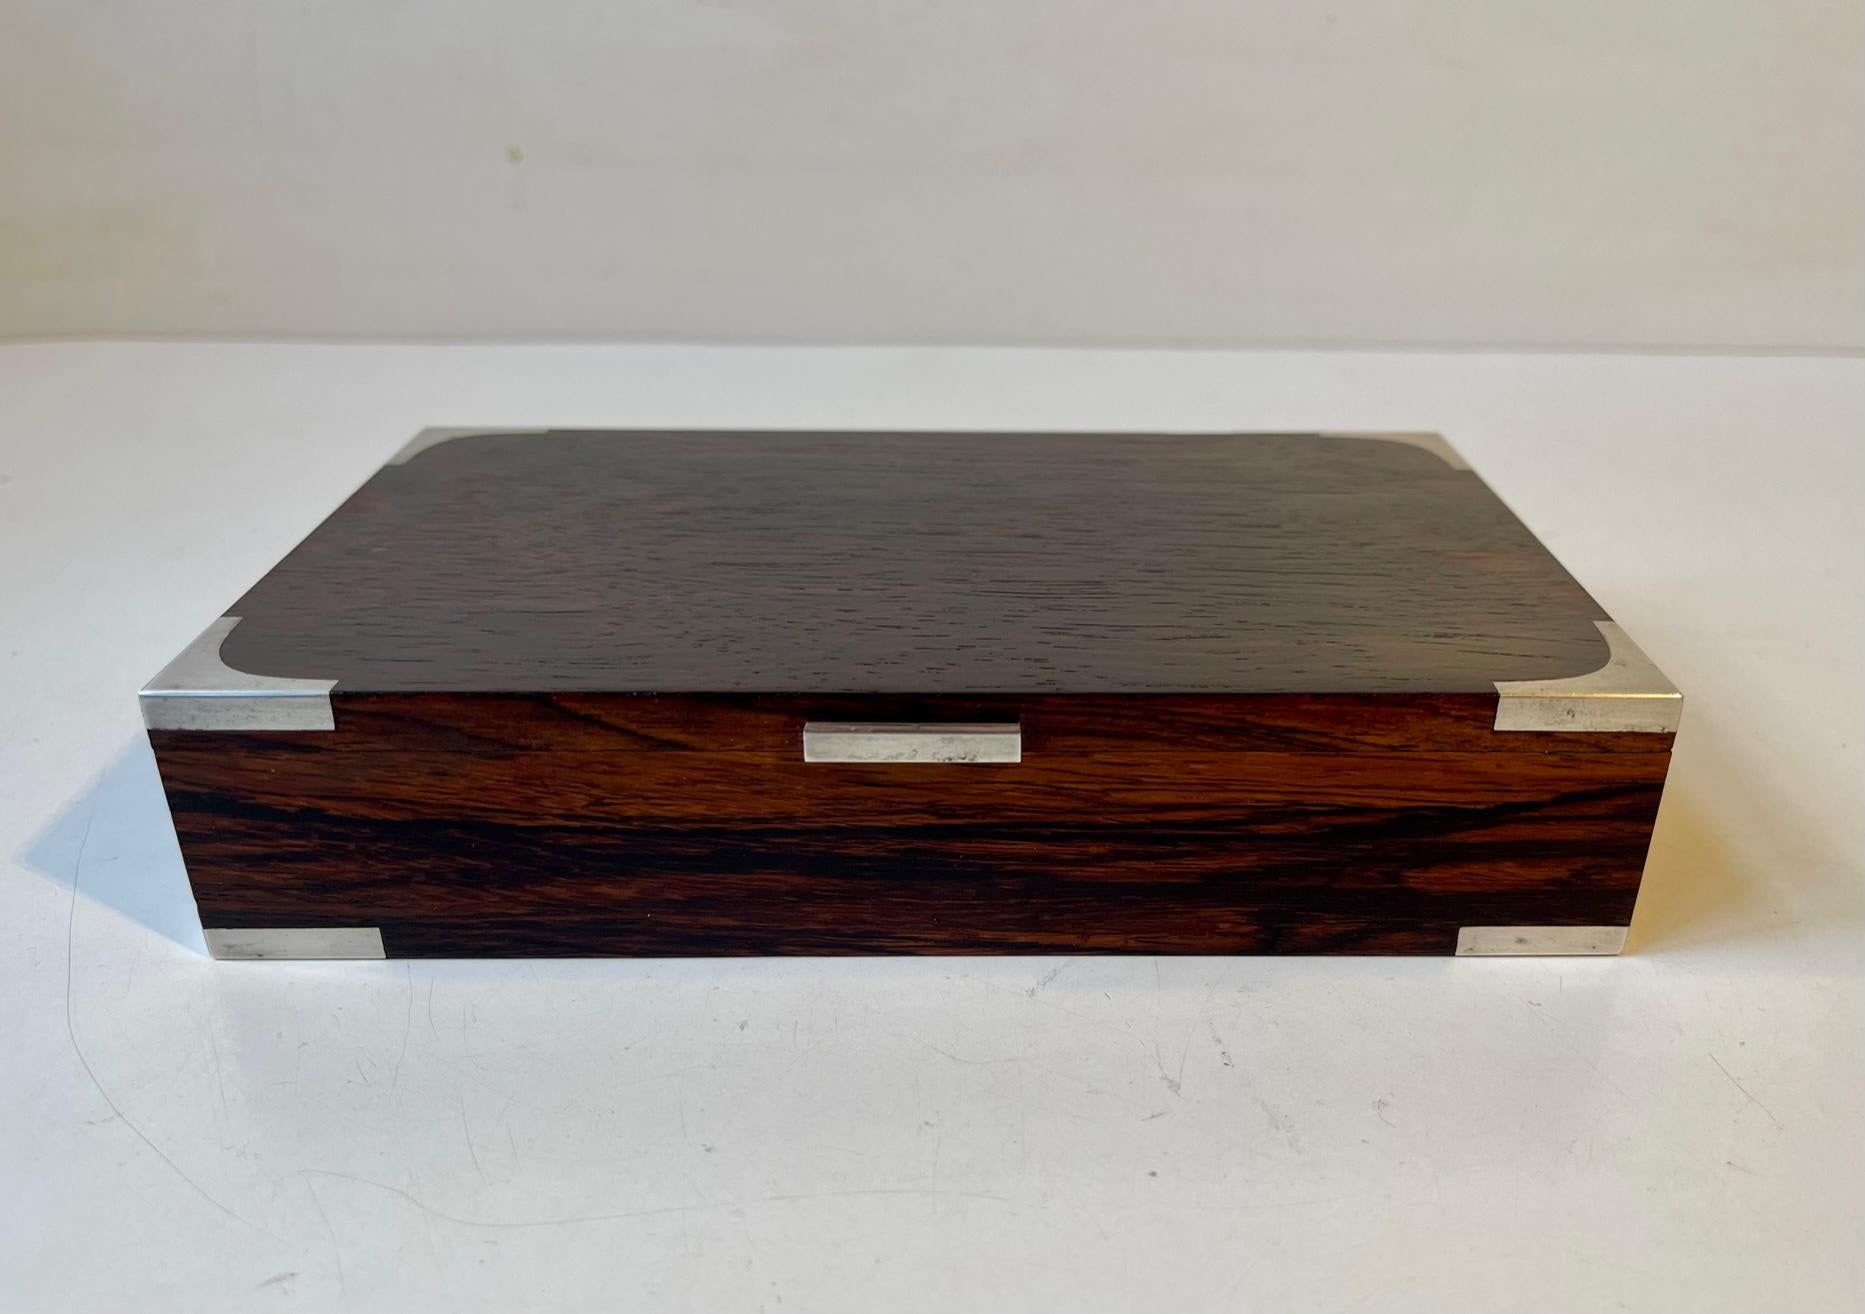 Hans Hansen Danish Modern Cigar Box in Rosewood and Sterling Silver, 1950s For Sale 1